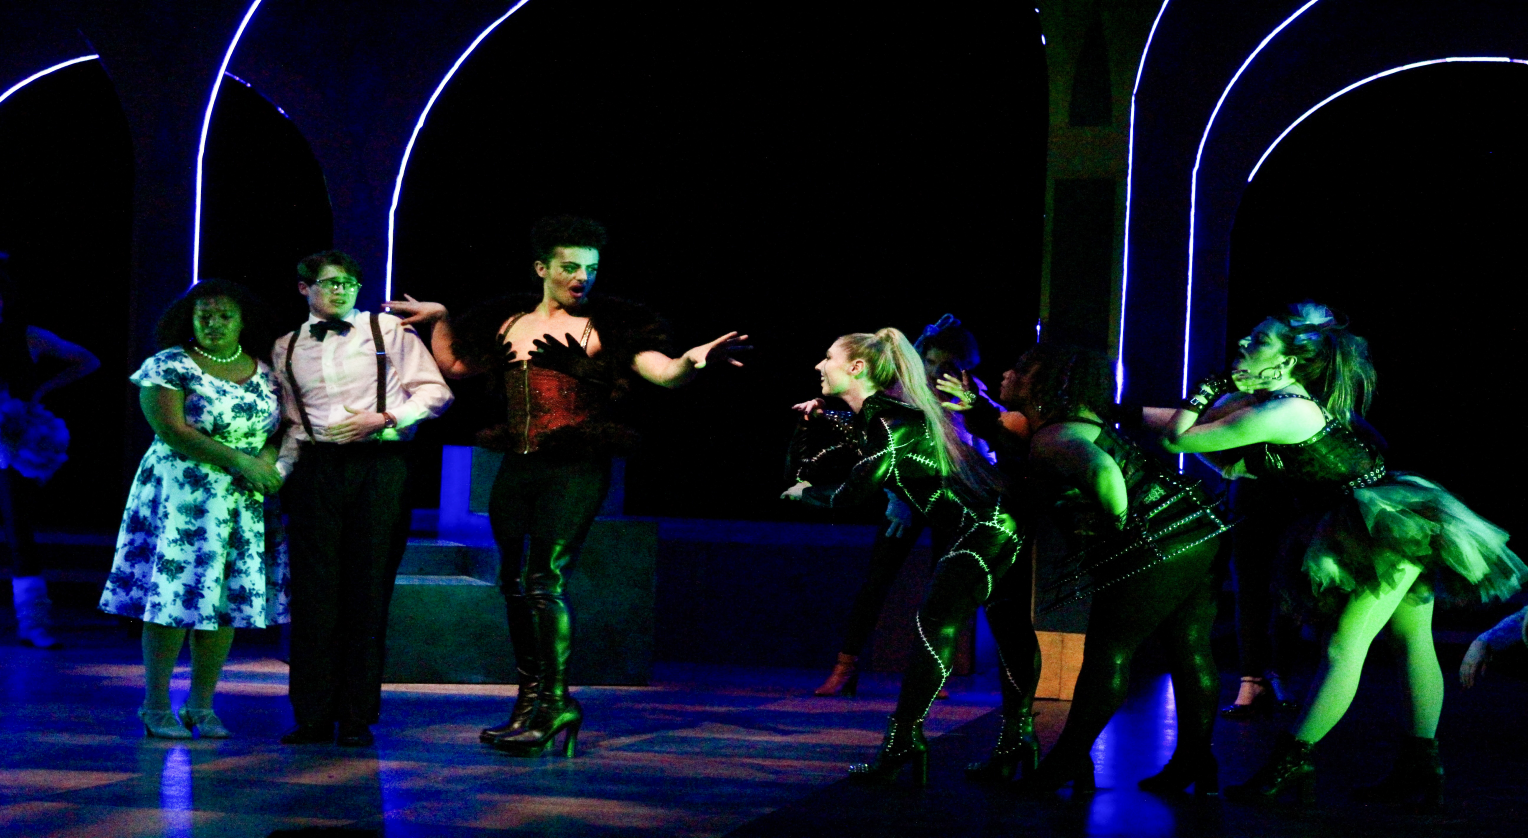 The Rocky Horror Show - Theatre and Dance